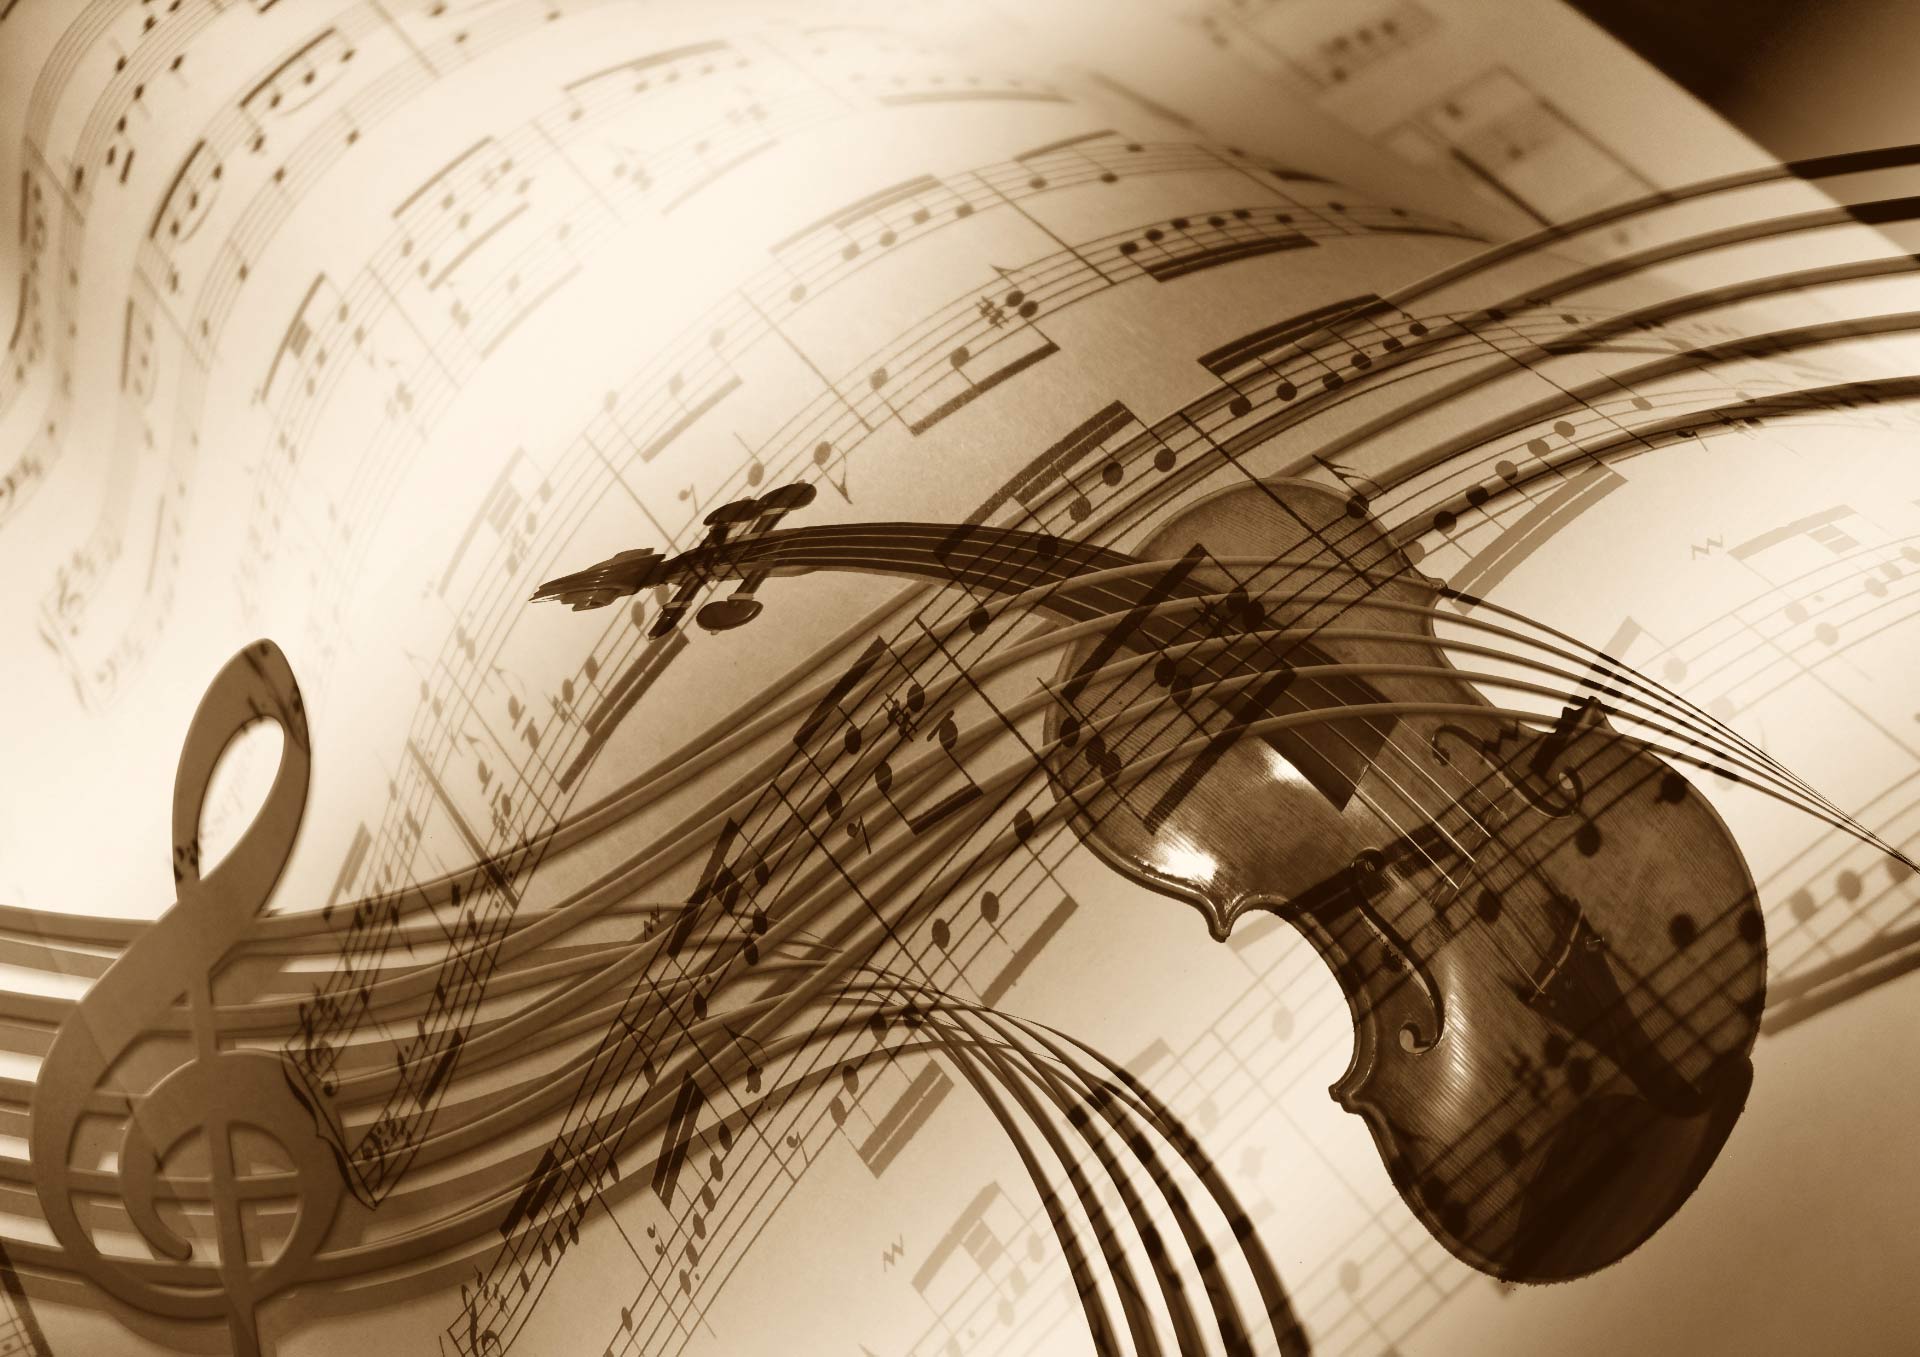 Happy music linked to creative thinking